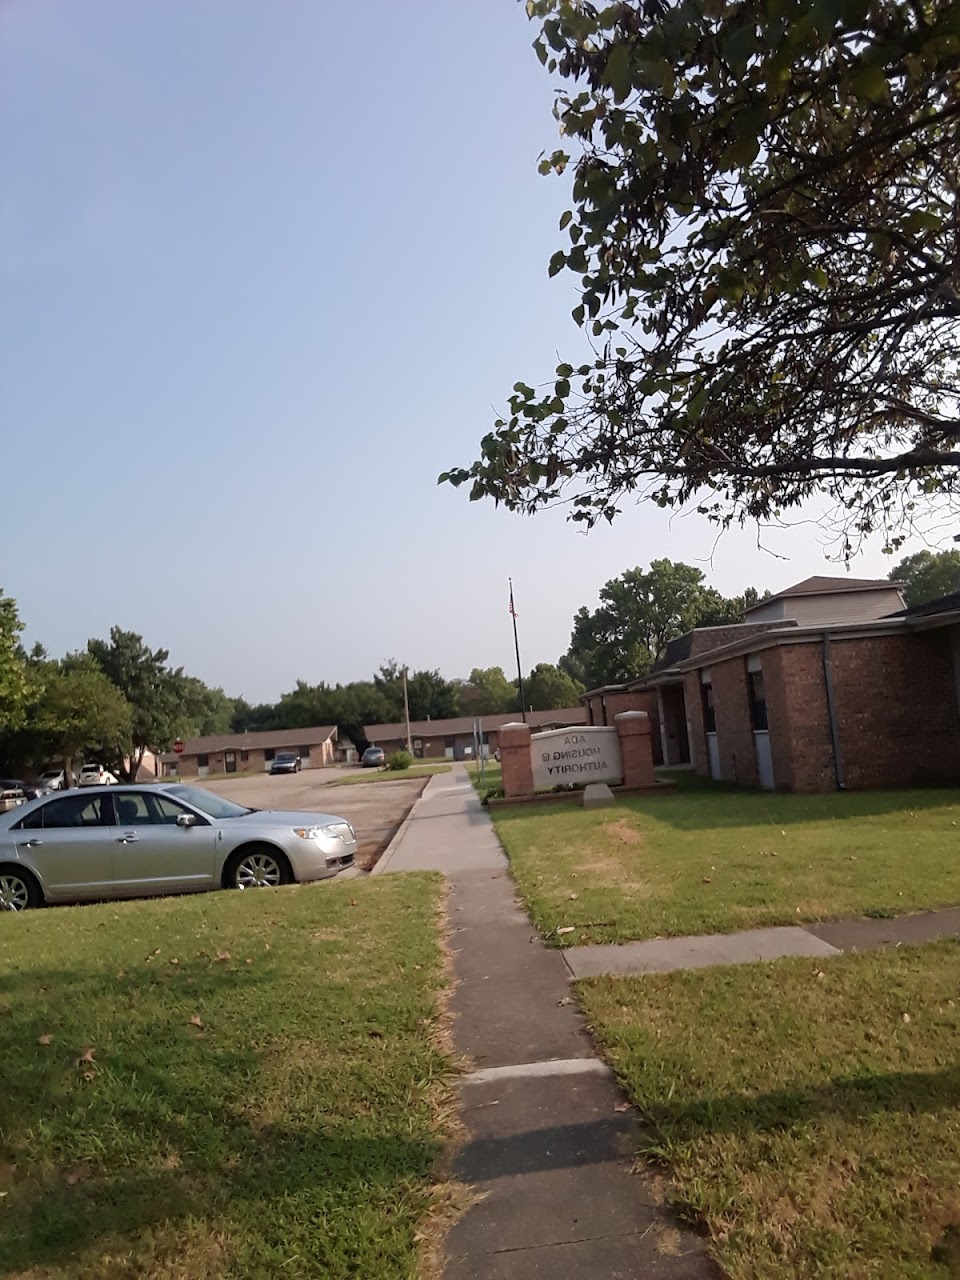 Photo of Housing Authority of the City of Ada at 1100 N. STOCKTON ADA, OK 74820